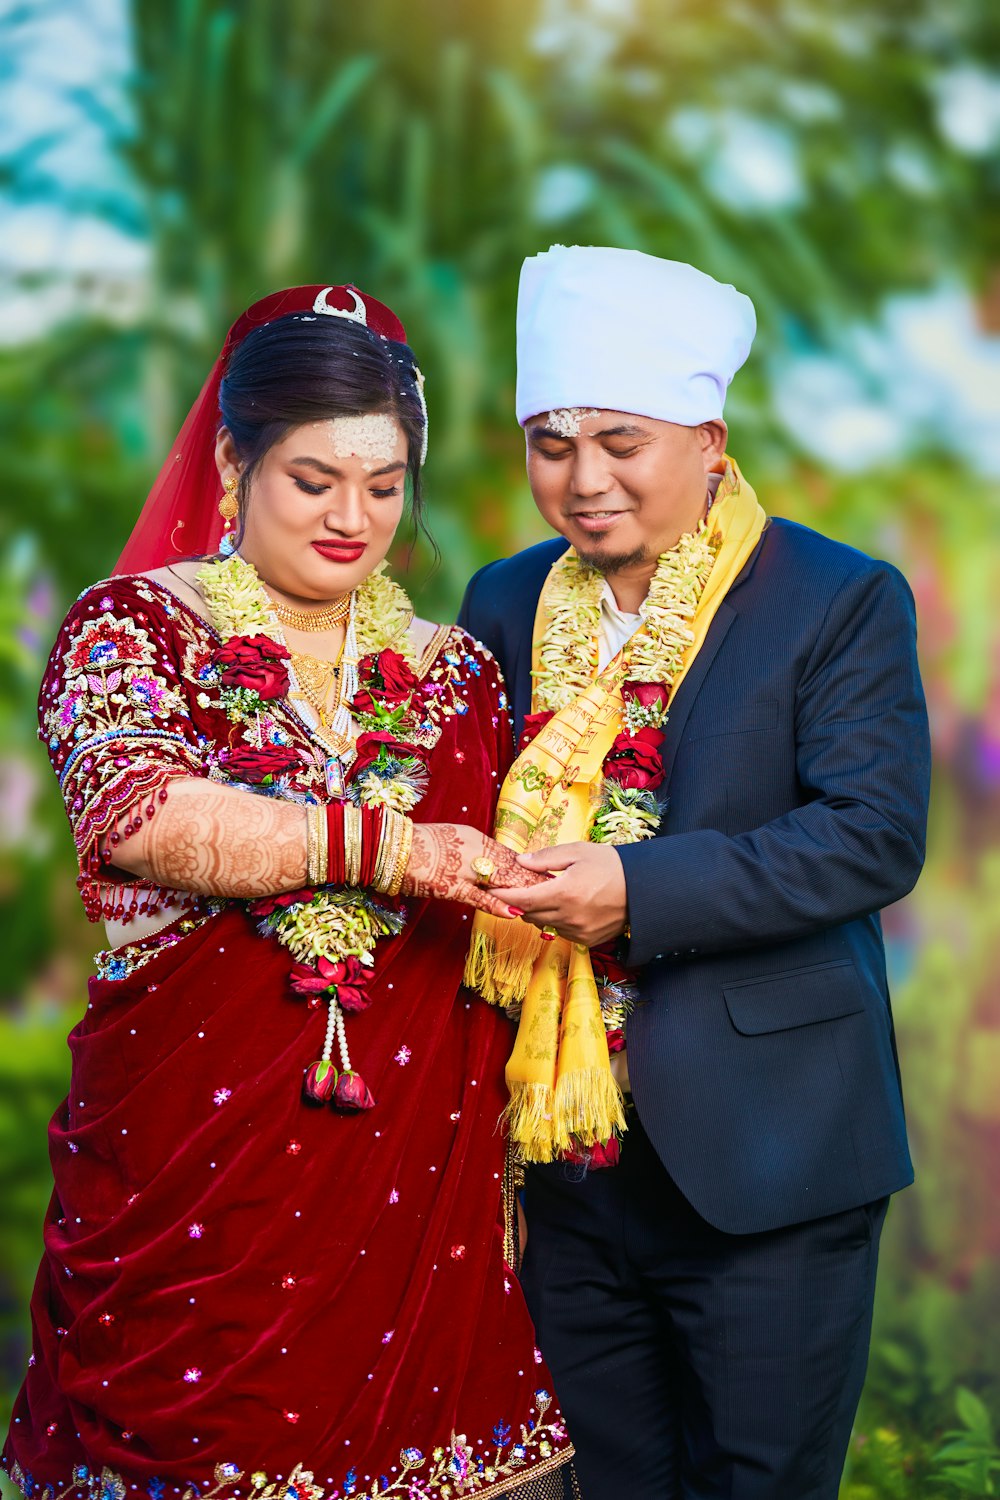 a man and woman dressed in traditional indian garb